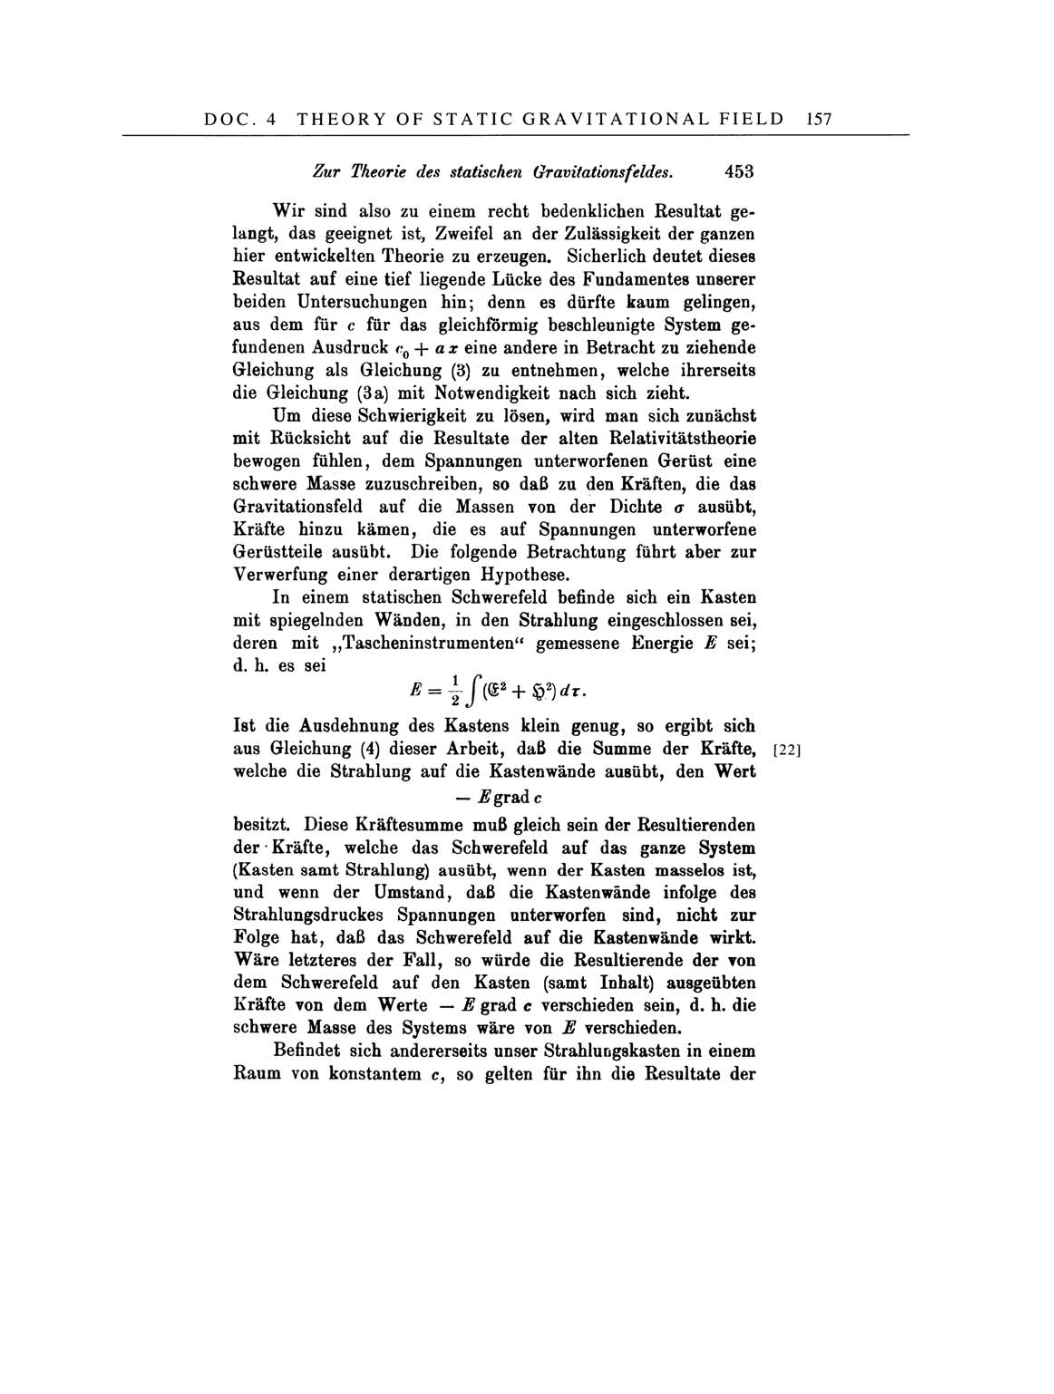 Volume 4: The Swiss Years: Writings 1912-1914 page 157